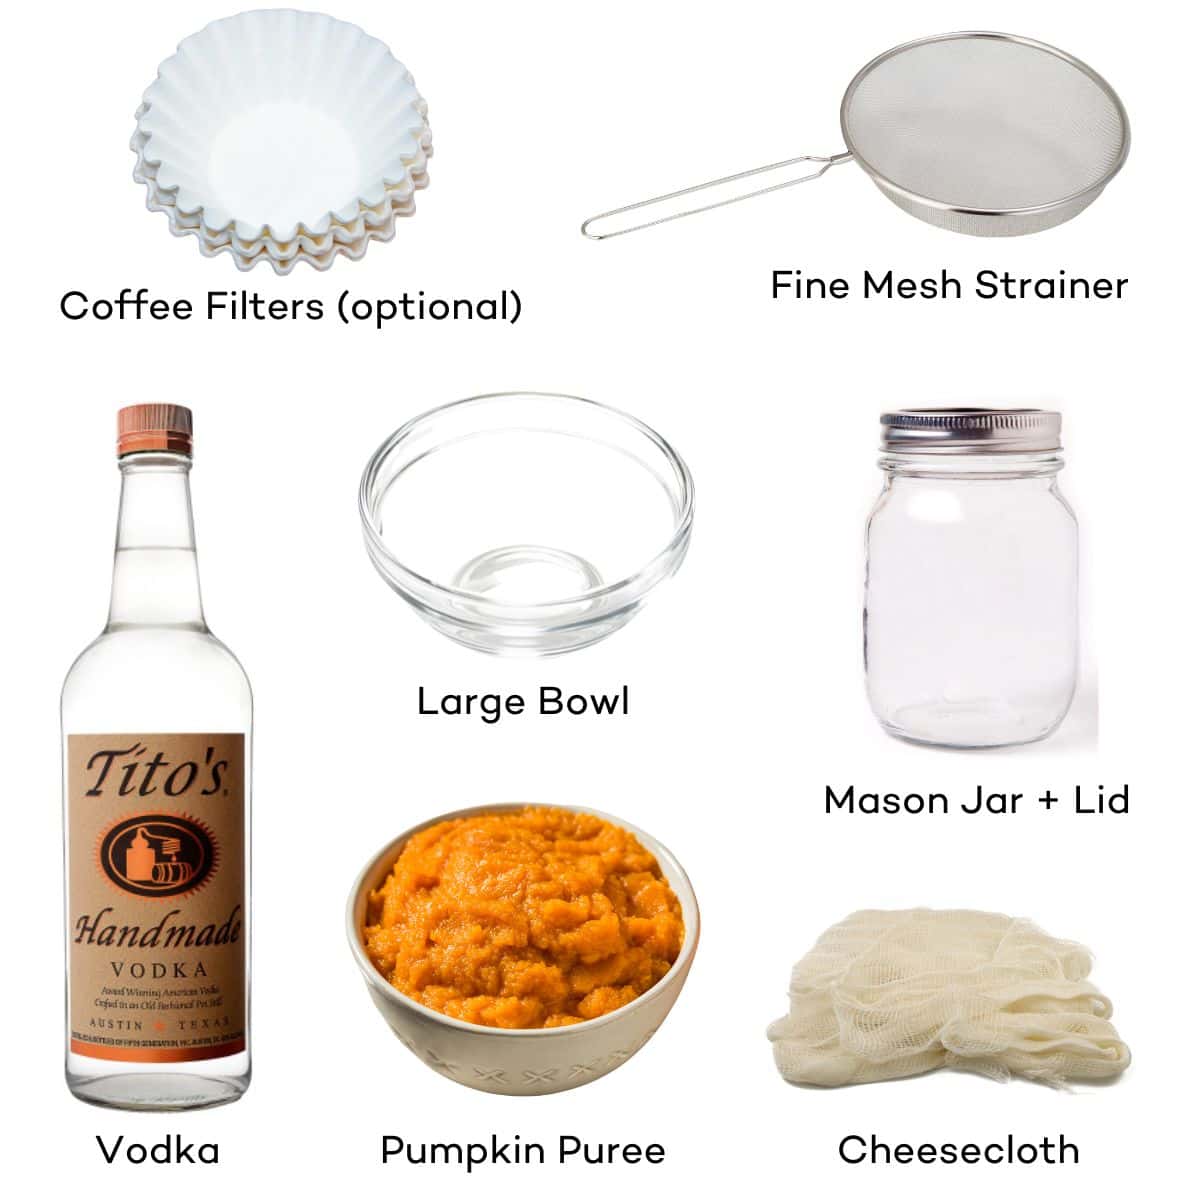 ingredients and tools needed for pumpkin infused vodka - vodka, pumpkin puree, cheesecloth, mason jar, large bowl, fine mesh strainer, coffee filters.